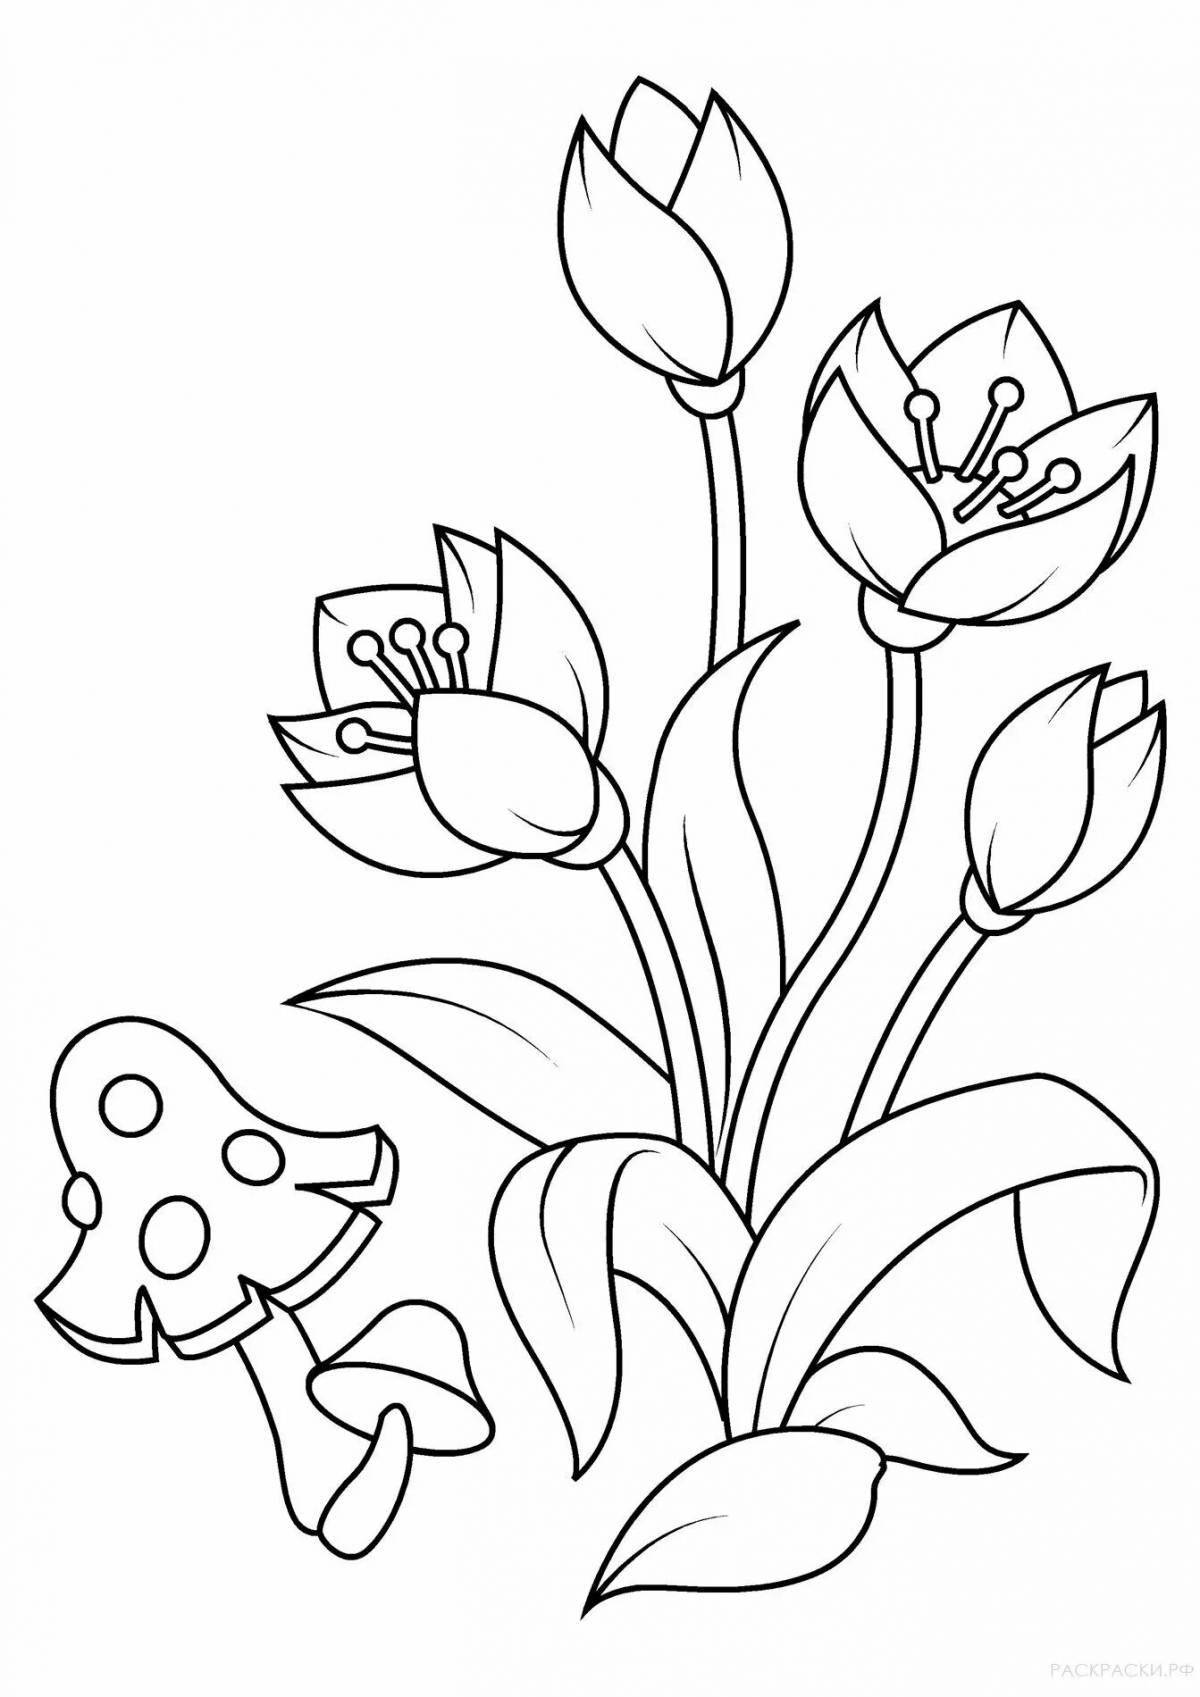 Colorful plants coloring page for kids